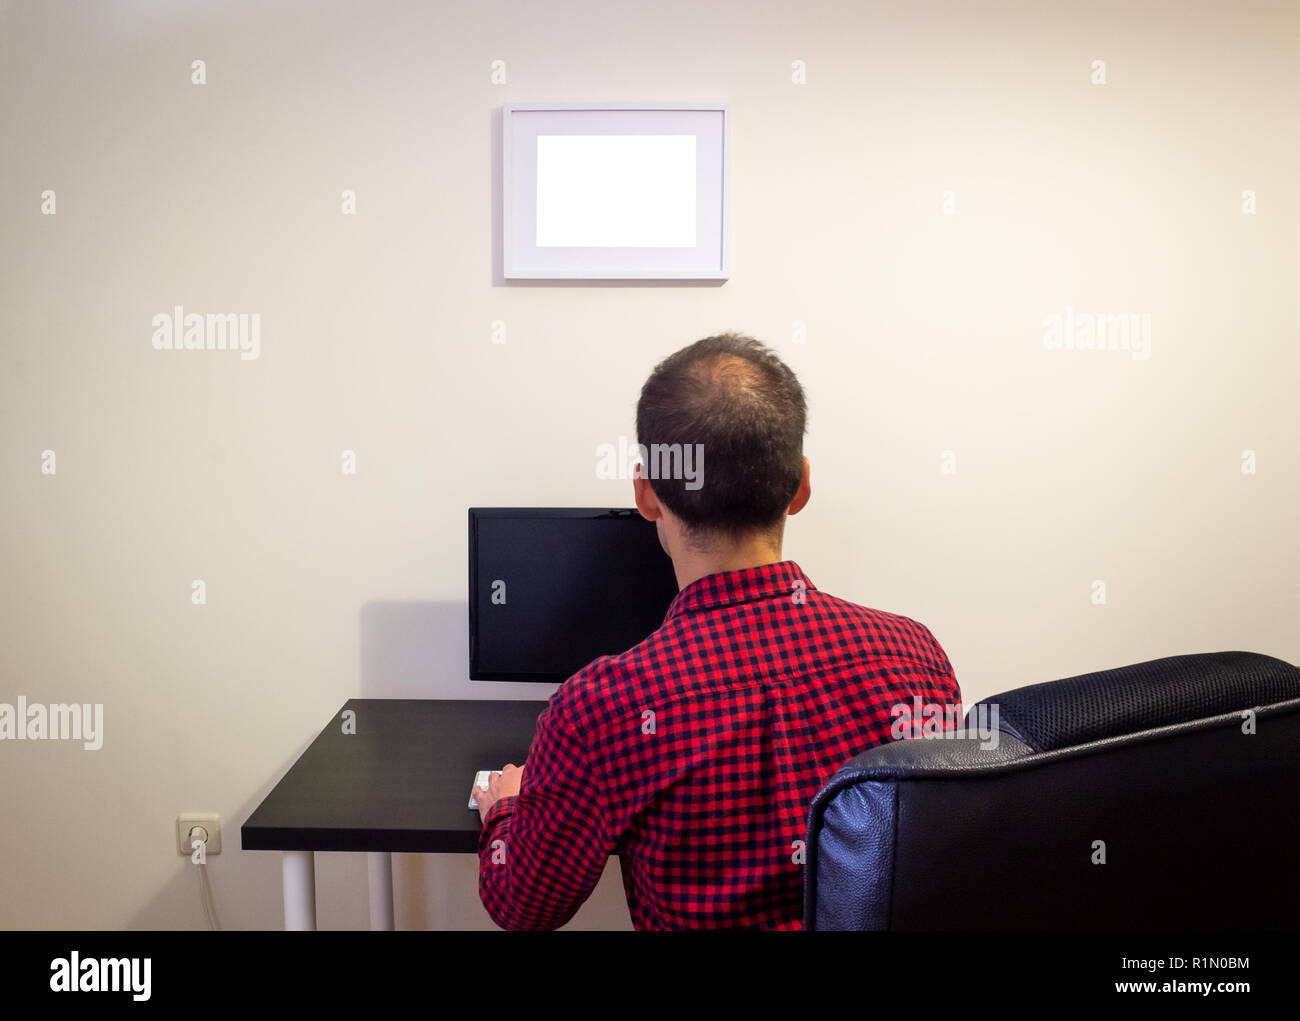 Man at Office Computer on Wooden Black Desk Mockup. Dotted Red Shirt, LCD Screen, Keyboard, Mouse, Desktop Computer, Photo Frame, Office Chair. Back V Stock Photo